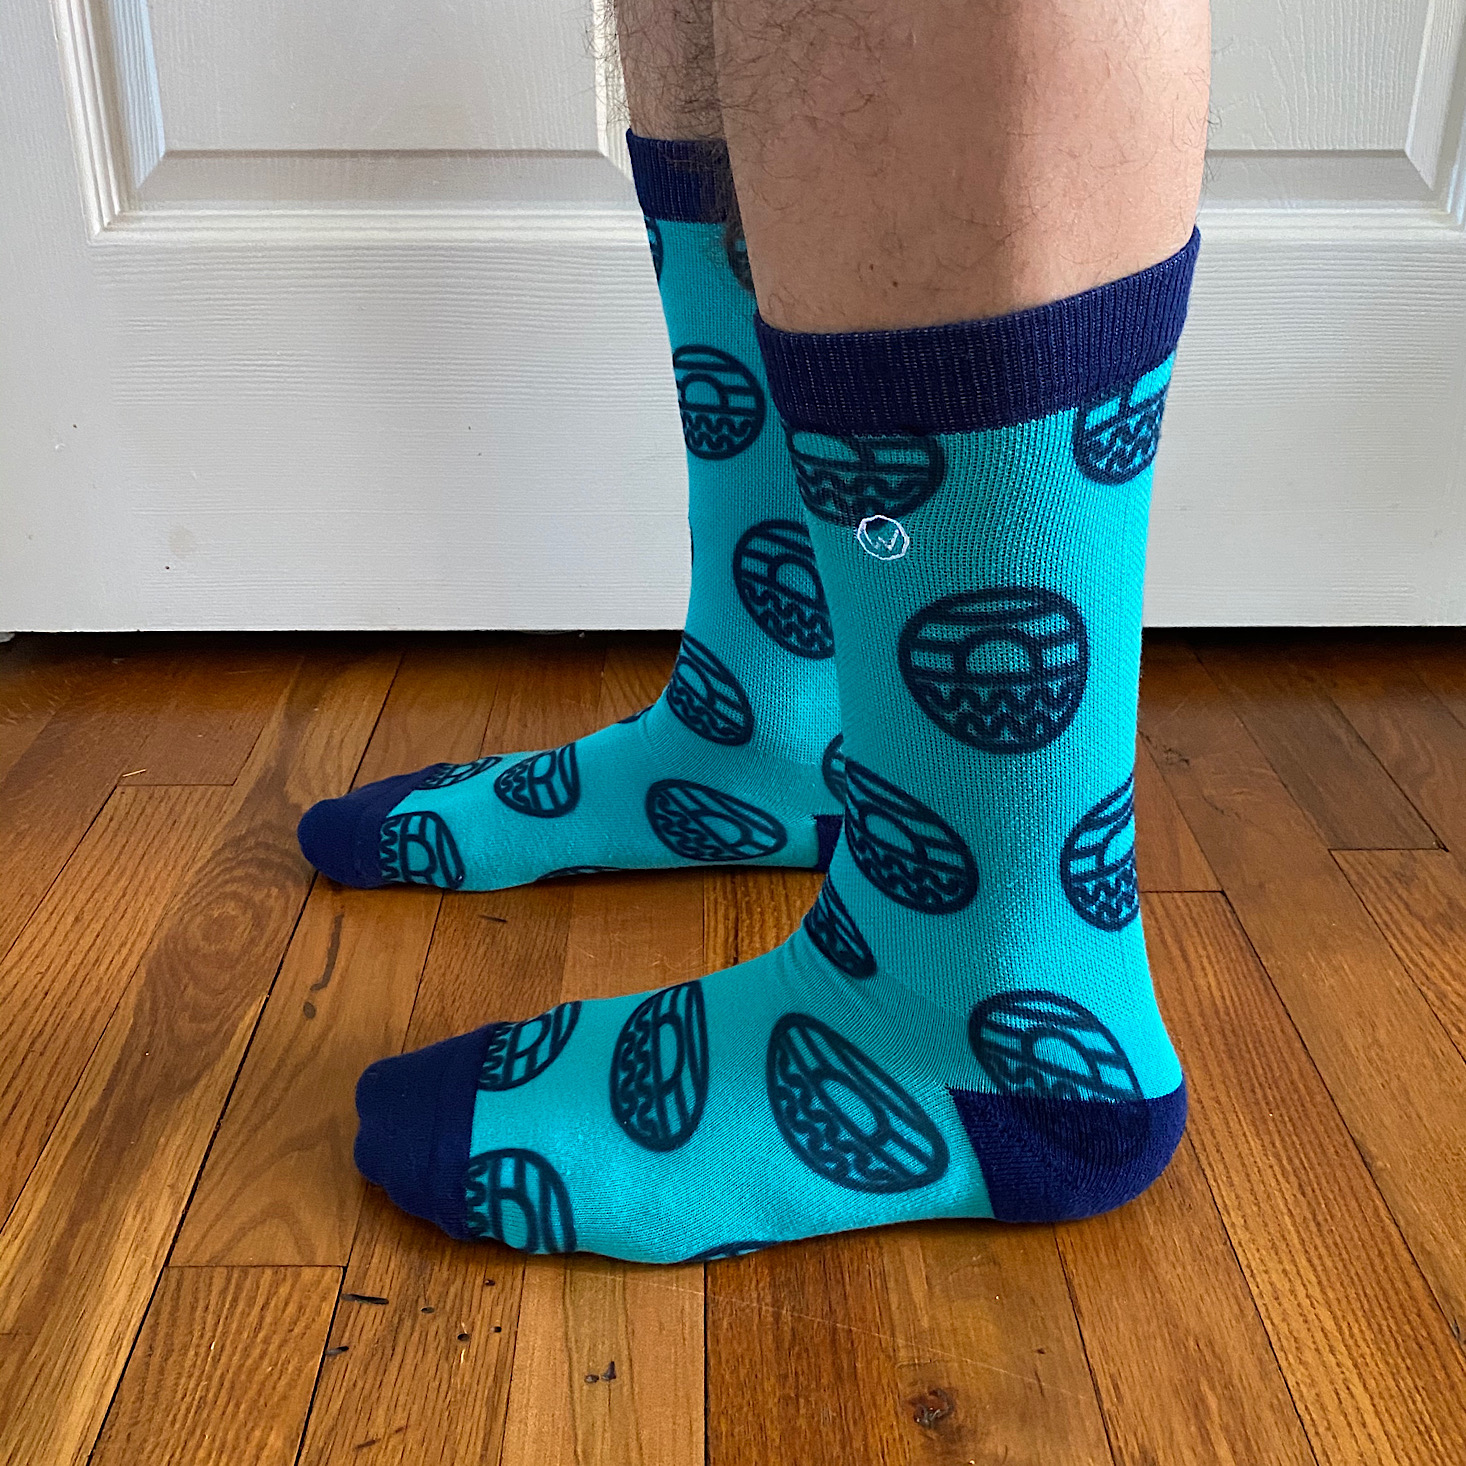 Wohven Socks Subscription Review + Coupon - February 2021 | MSA